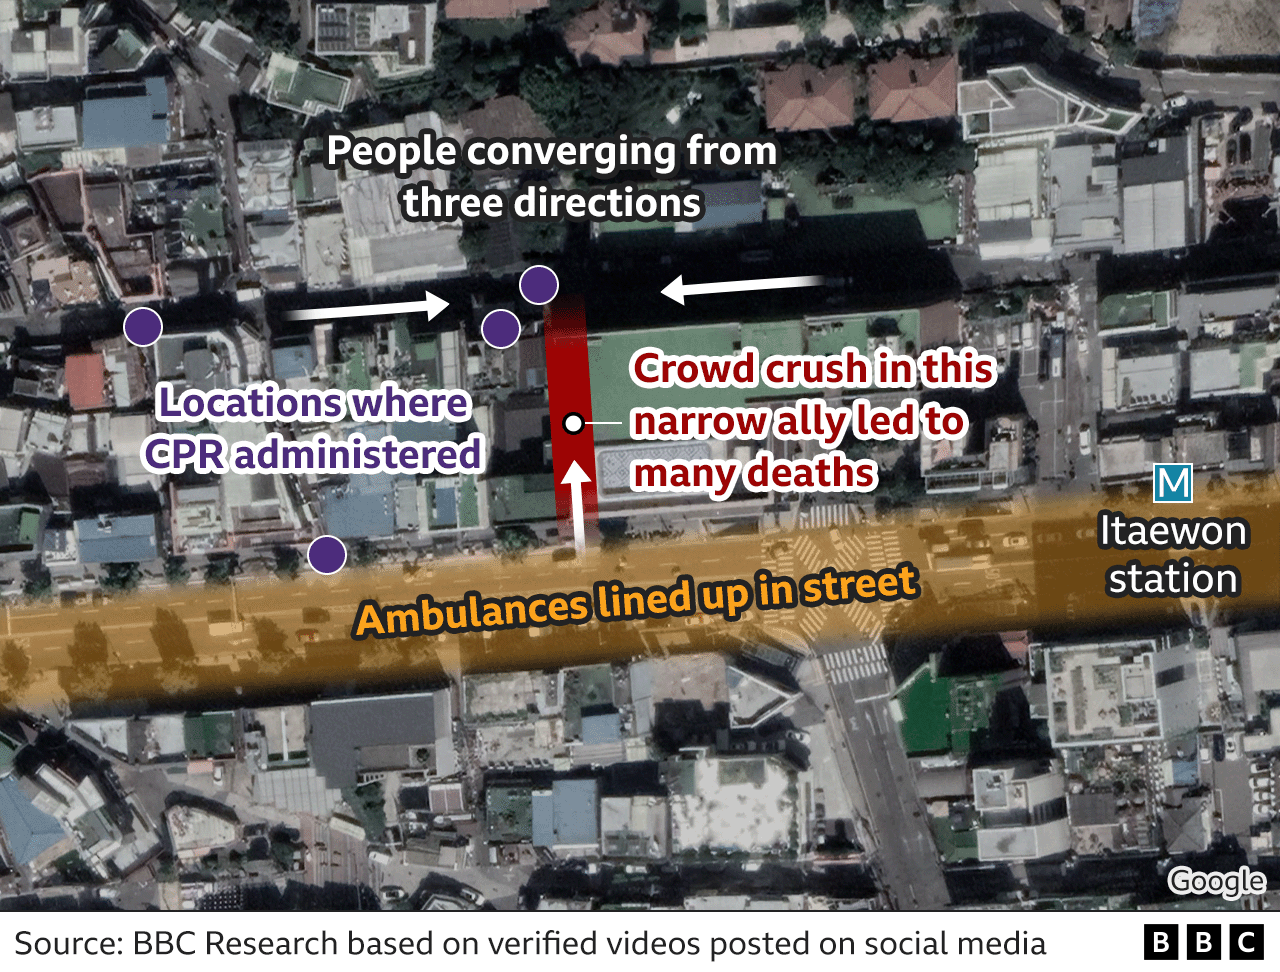 Satellite image of Itaewon district showing how crush happened in narrow alley